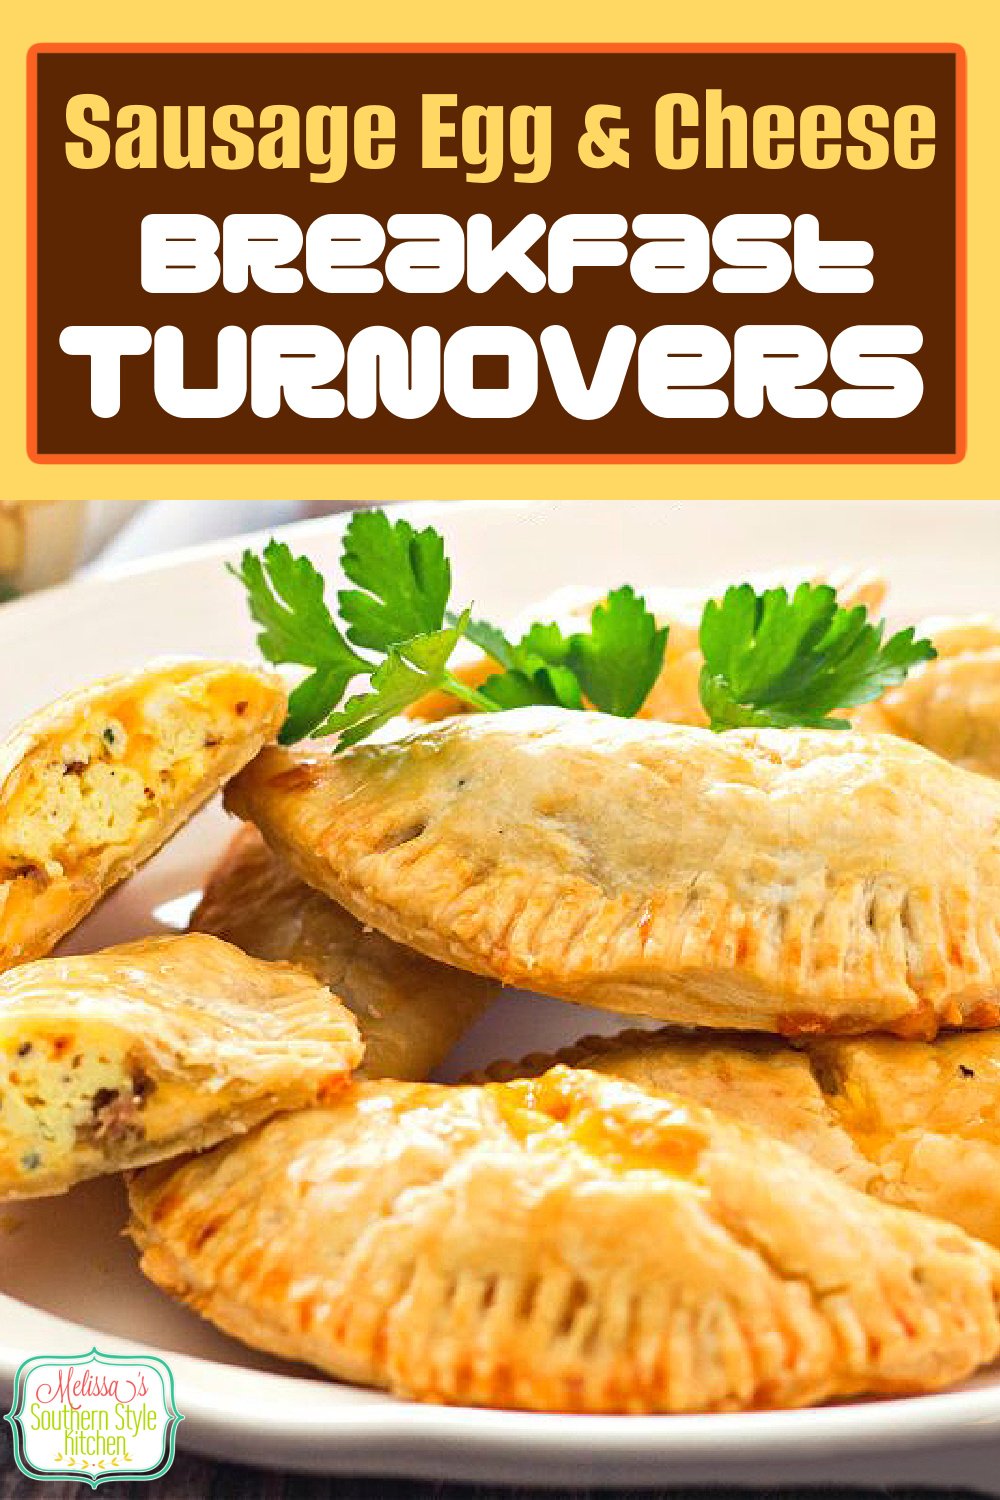 Start your morning with these easy-to-make Sausage and Egg Breakfast Turnovers #breakfastturnovers #sausageandeggs #sausageandeggturnovers #brunch #eggs #sausage #holidaybrunch #eggrecipes #handpies #pies #pastries #southernfood #southernrecipes via @melissasssk